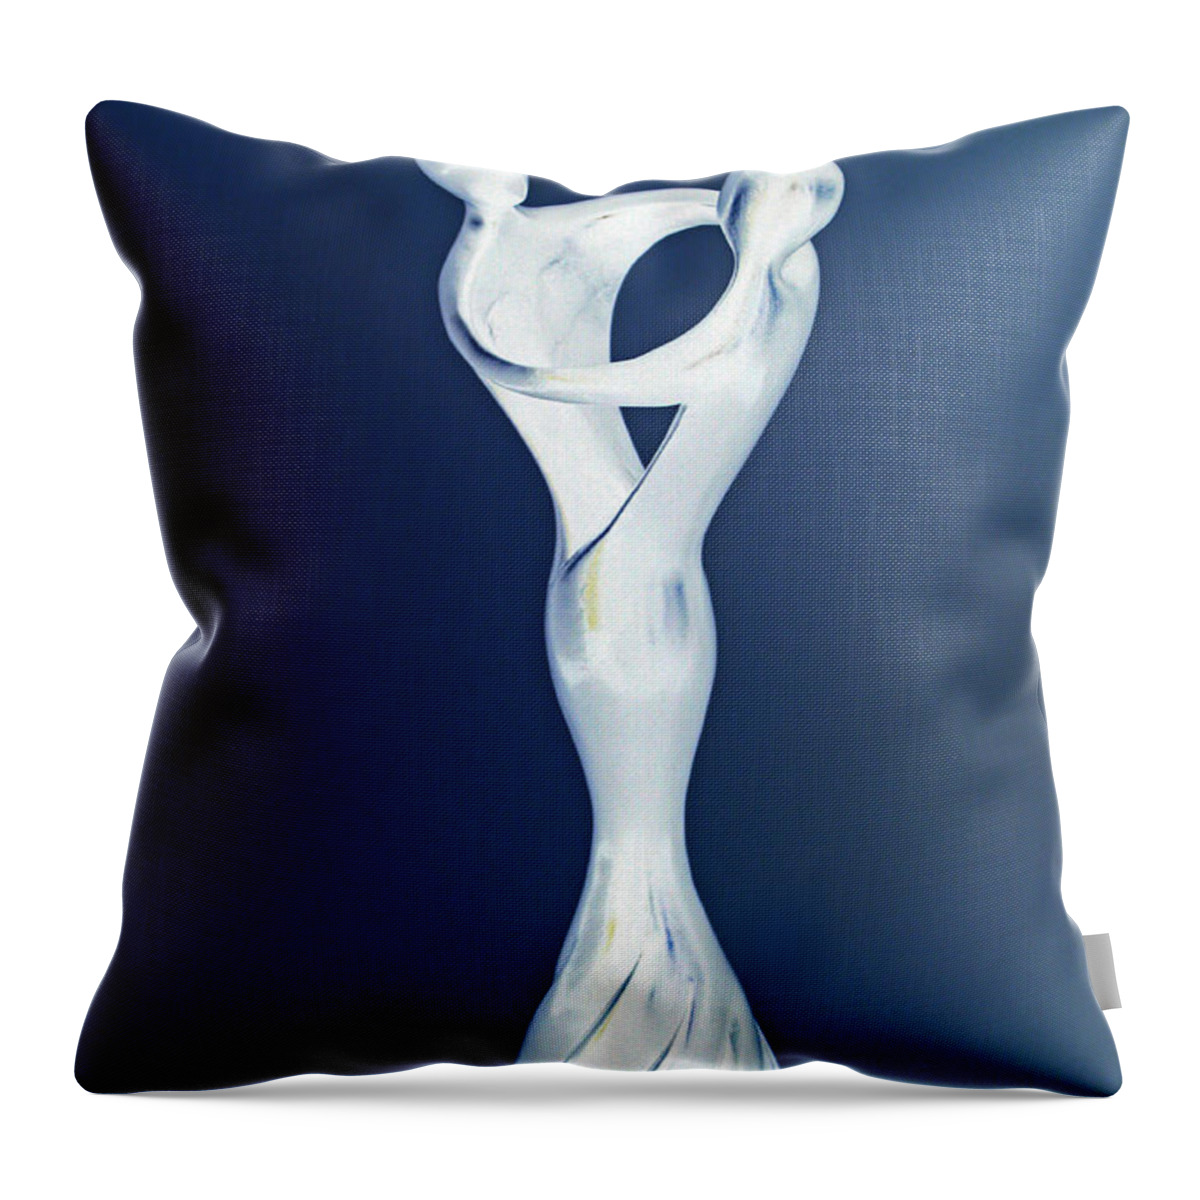 Statute Throw Pillow featuring the photograph Love's Glow by Carolyn Stagger Cokley